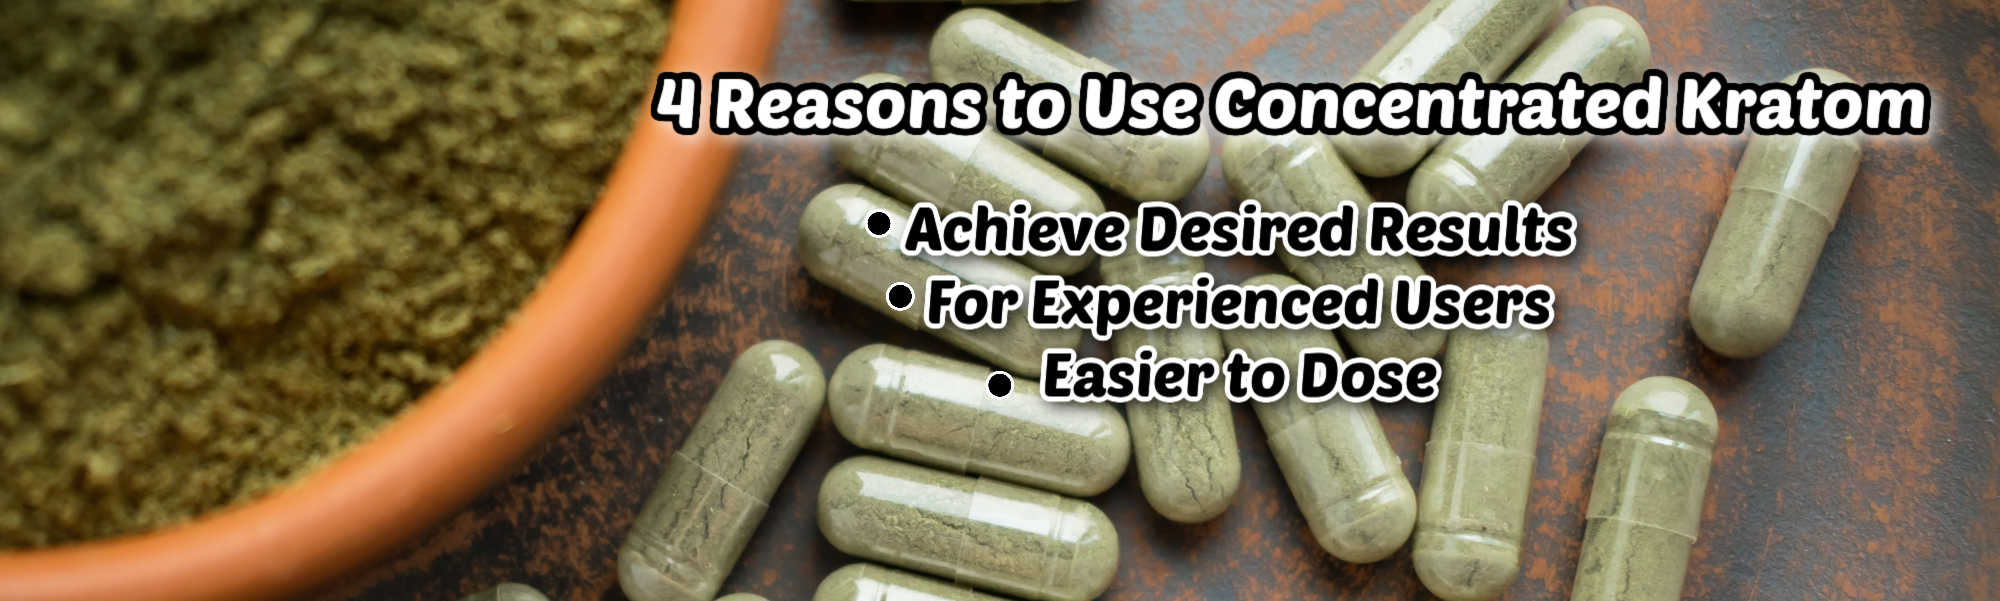 image of 4 reasons to use concentrated kratom